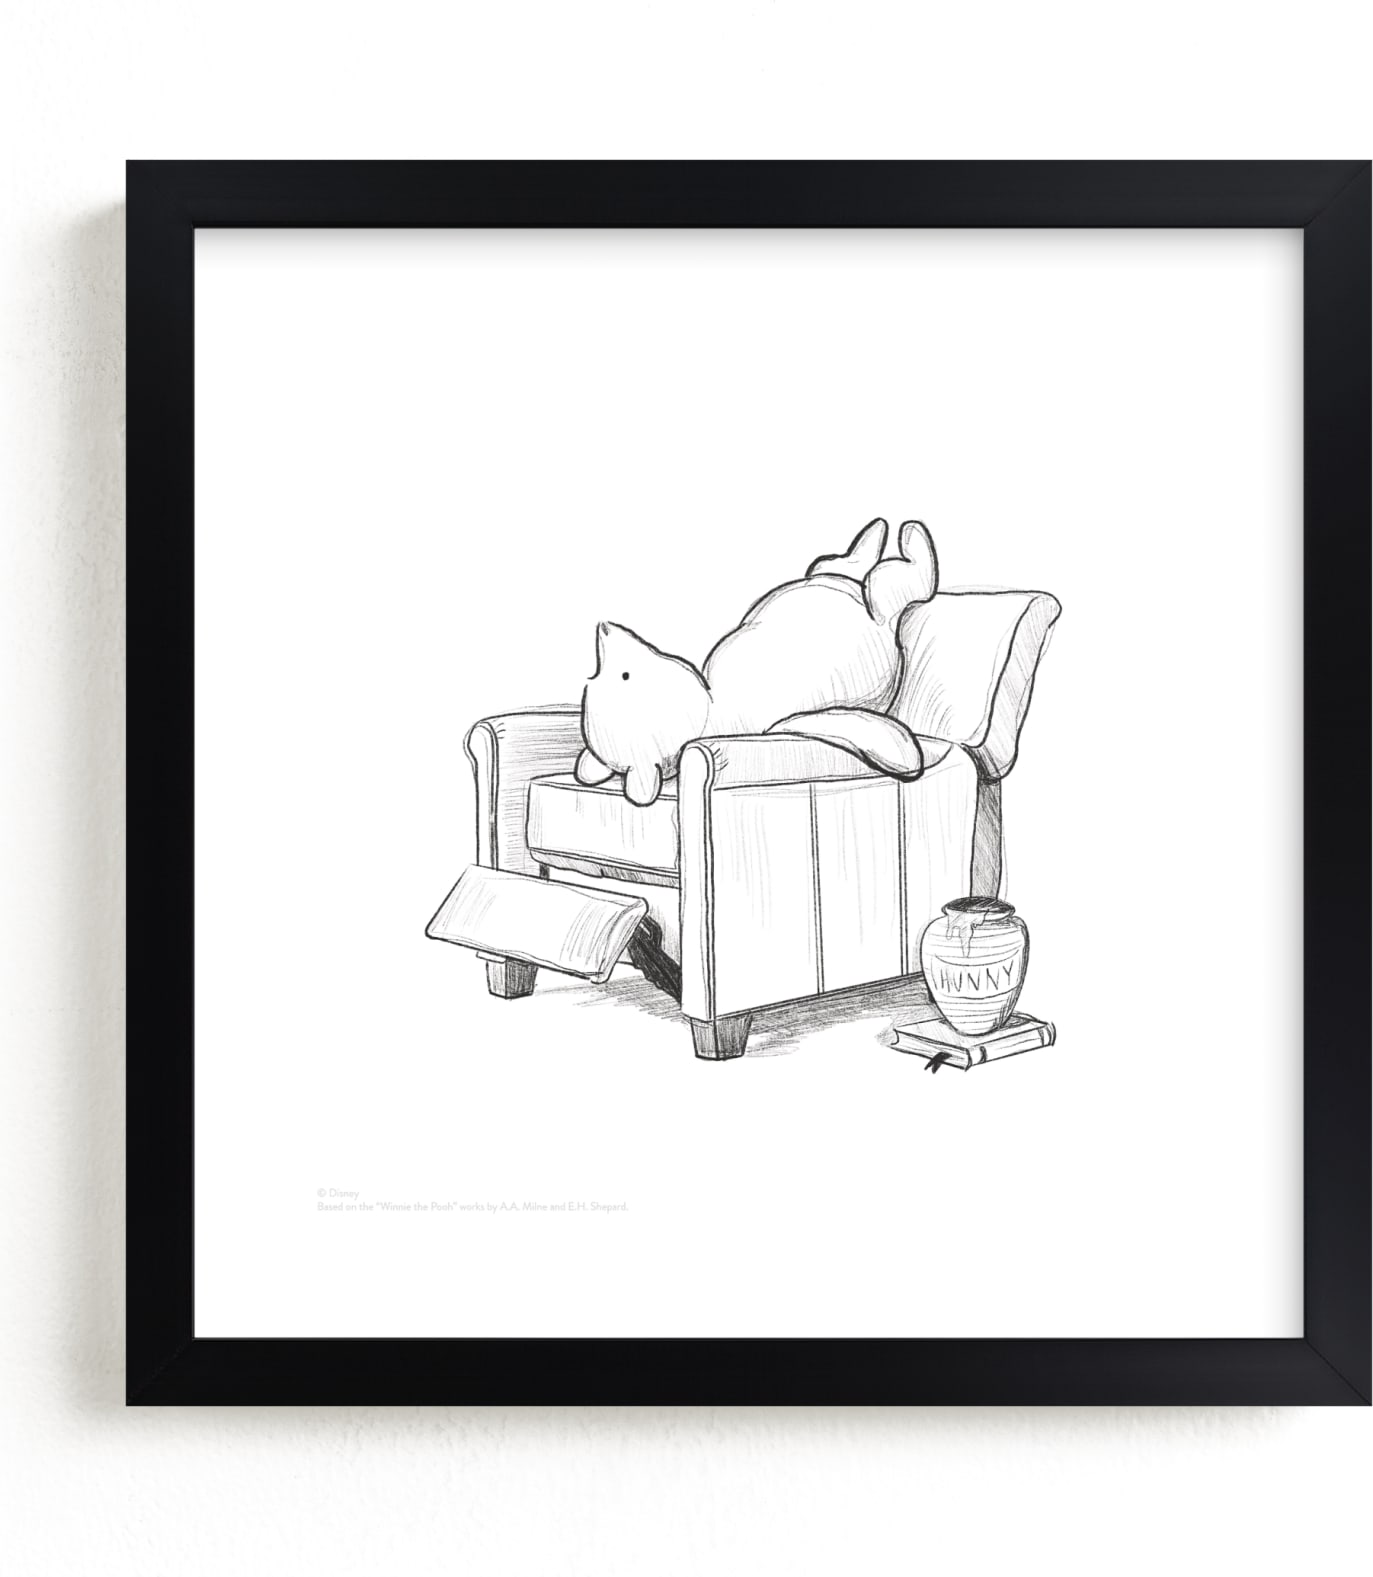 This is a black and white disney art by Stefanie Lane called Pooh Lounging from Disney's Winnie The Pooh.